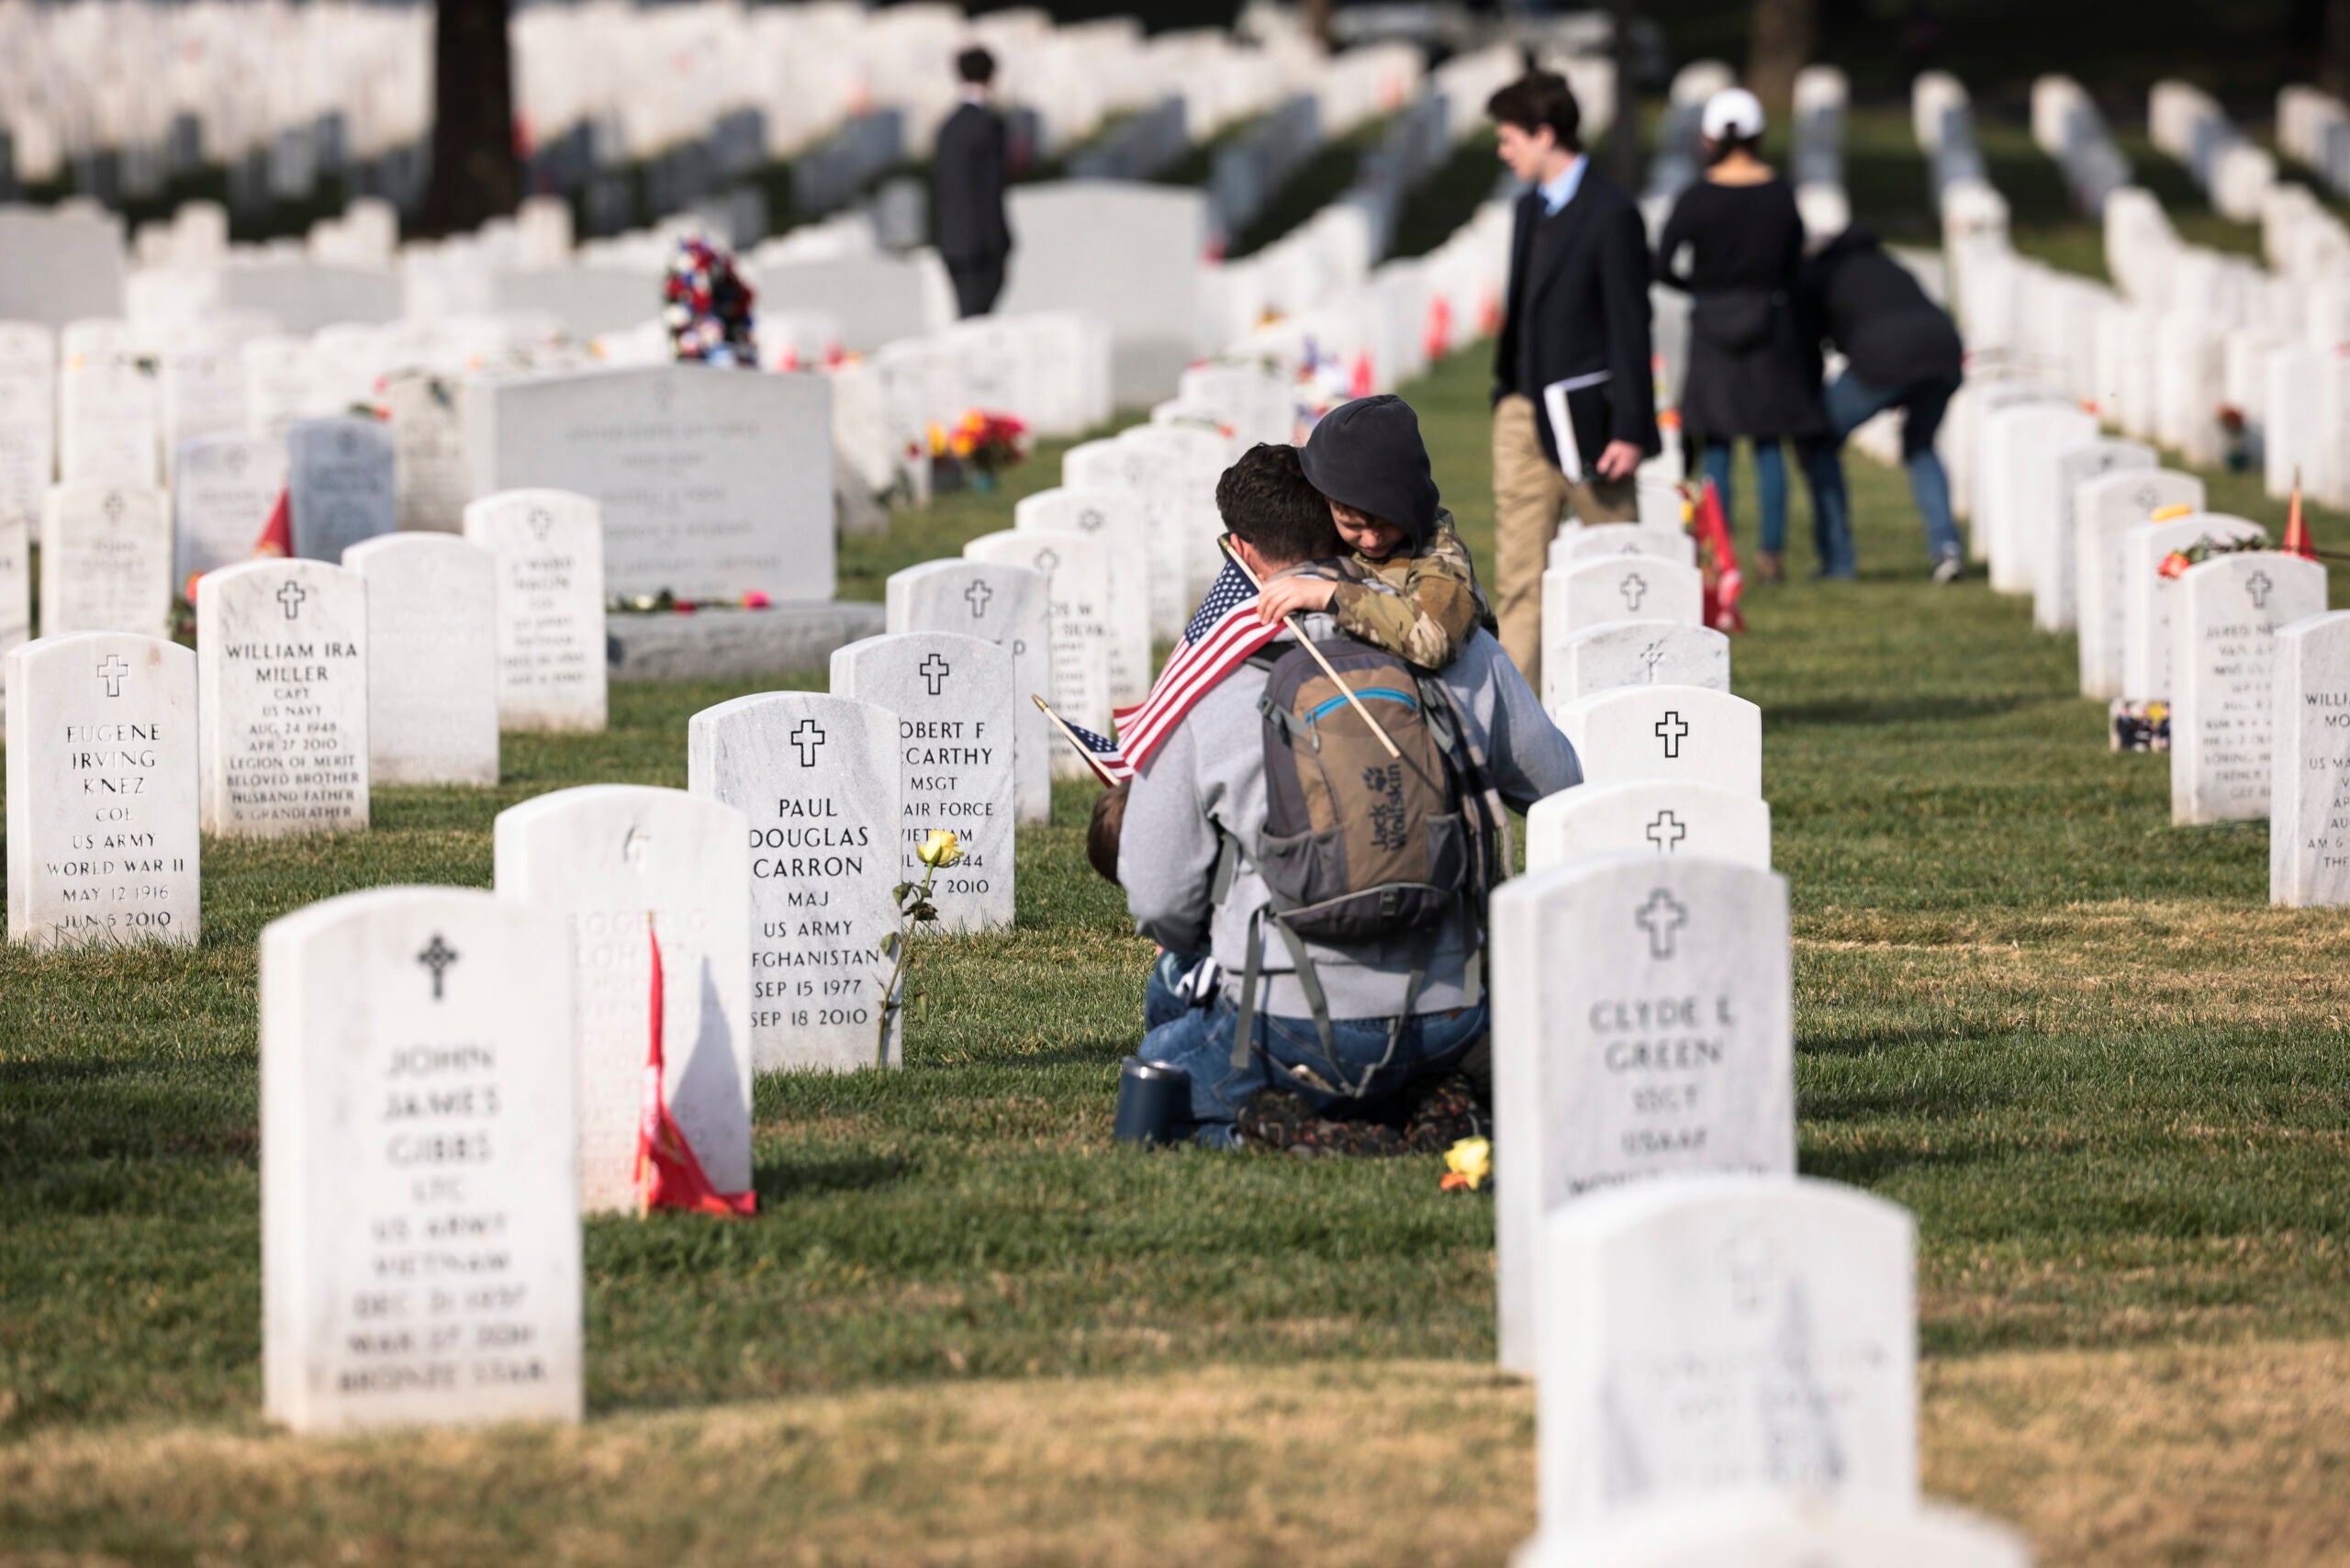 ARLINGTON, VIRGINIA - NOVEMBER 11: Army veteran Stephen Hedger is hugged by his son Lincoln as he visits the gravesite of U.S. Army Major Paul Douglas Carron at Arlington National Cemetery on Veterans Day, November 11, 2021 in Arlington, Virginia. During Veteran's Day, military members, veterans and their loved ones visited the cemetery to pay their respects to those they have lost. (Photo by Anna Moneymaker/Getty Images)